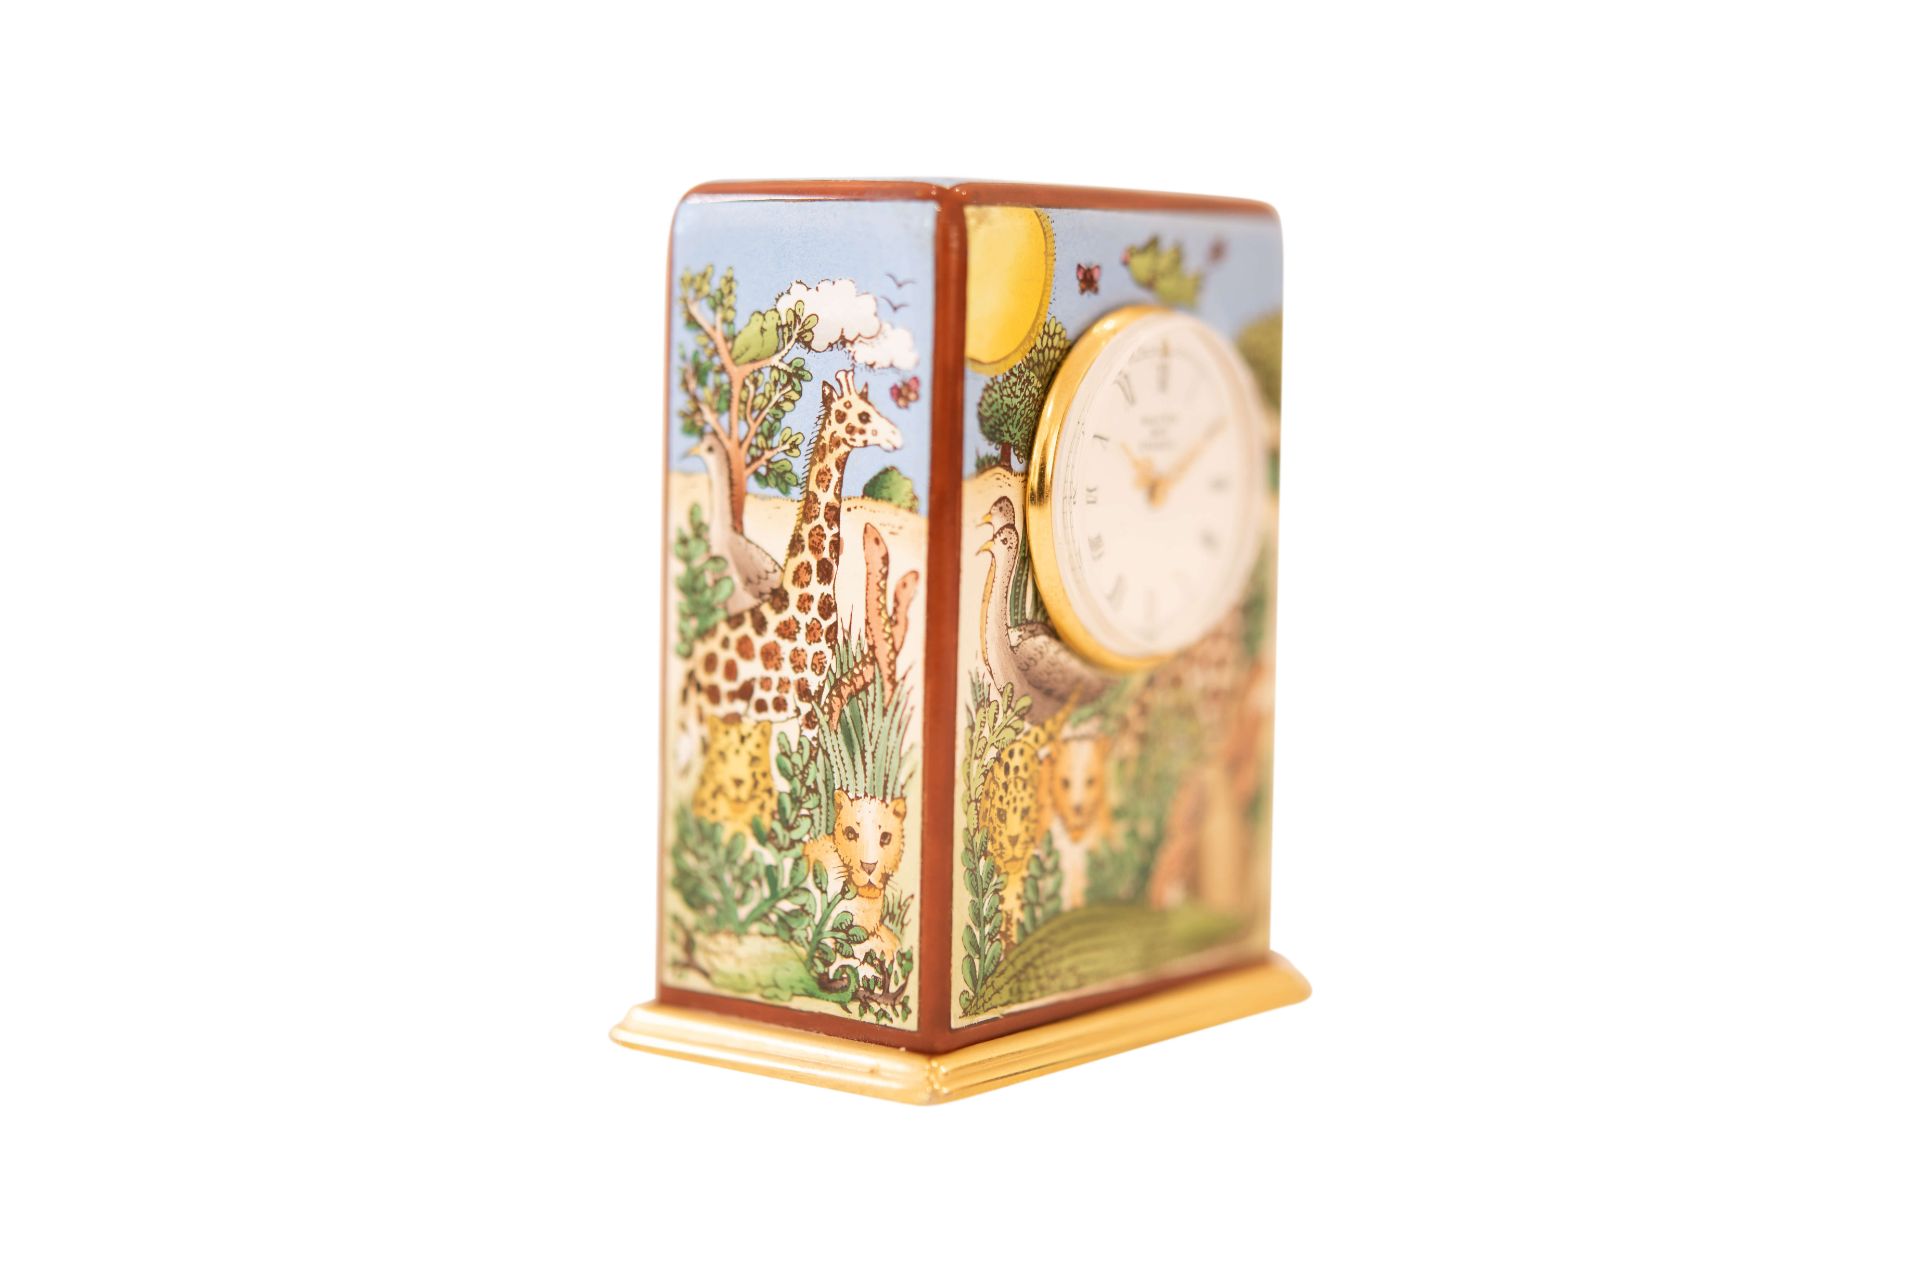 Halcyon Days Tischuhr |Halcyon Days Table Clock - Image 3 of 5